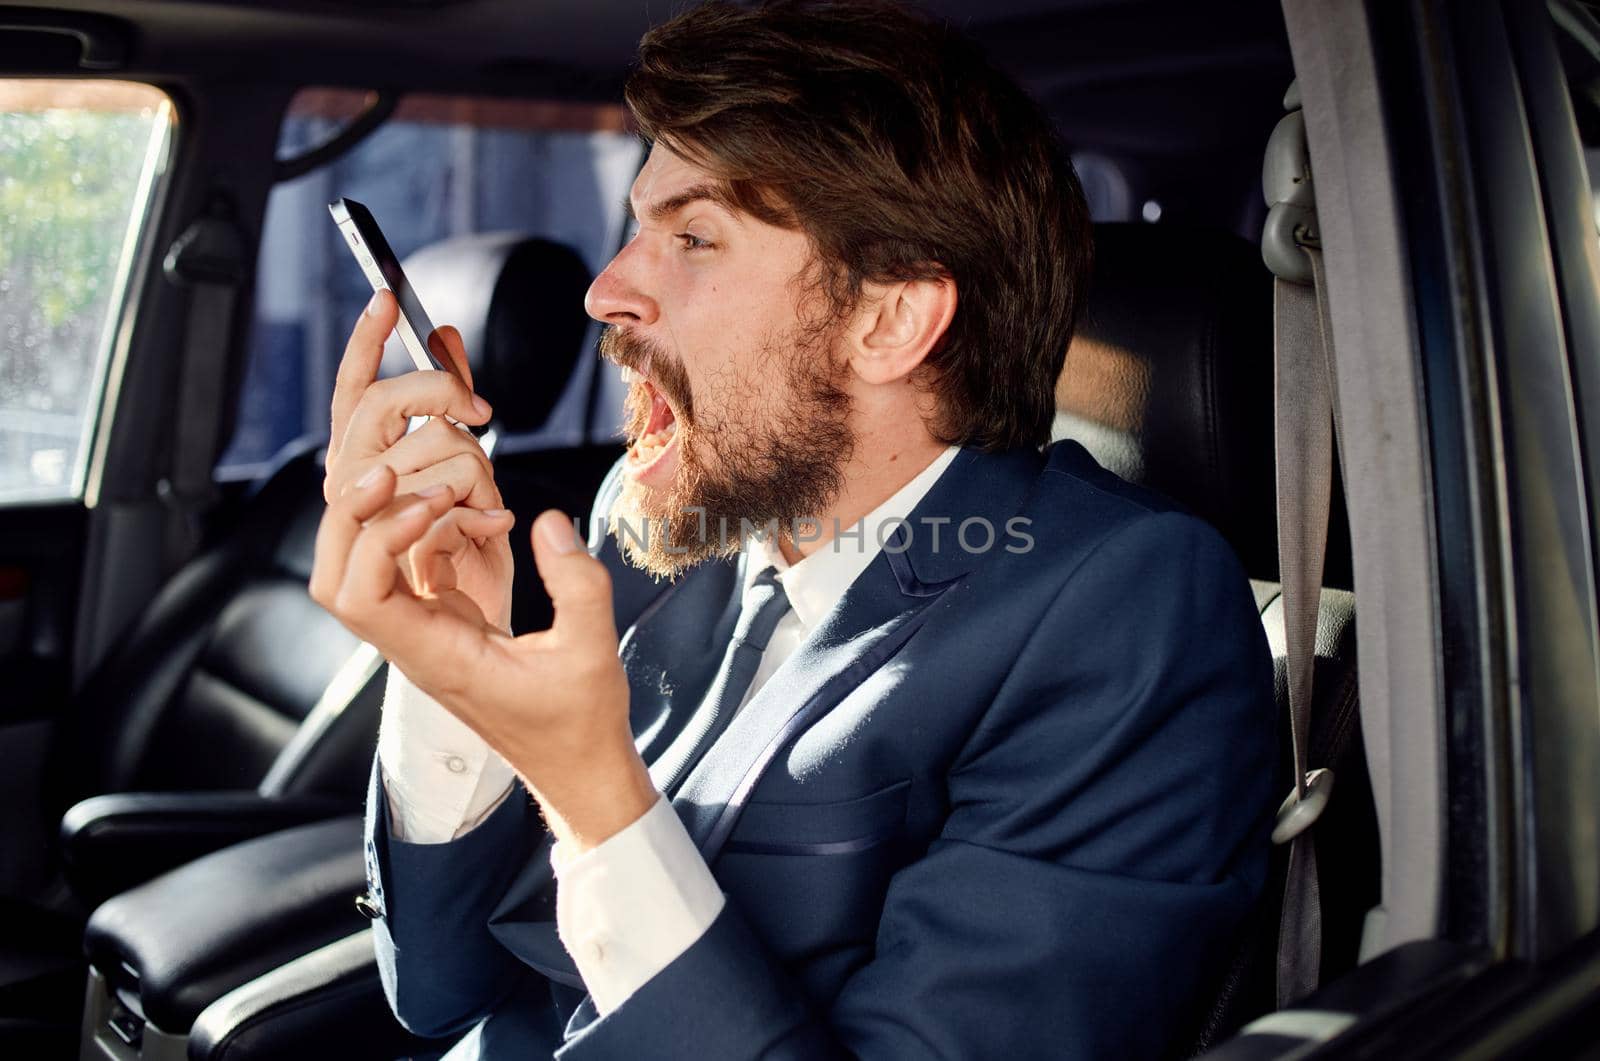 businessmen in a suit in a car a trip to work service by SHOTPRIME